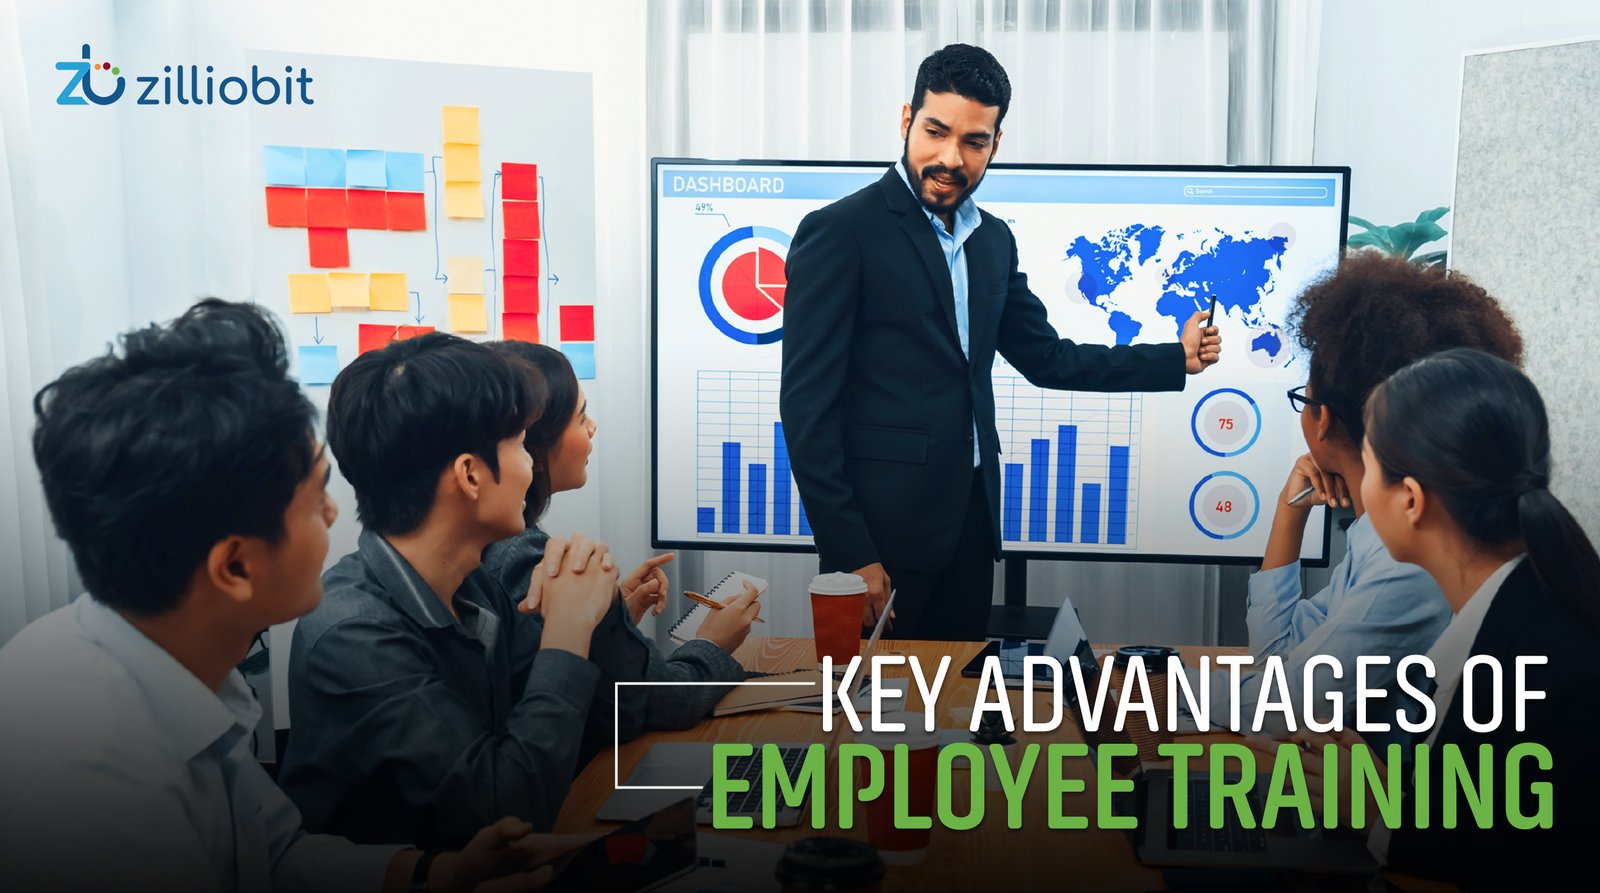 Check Out the Key Advantages of Employee Training | Zilliobit